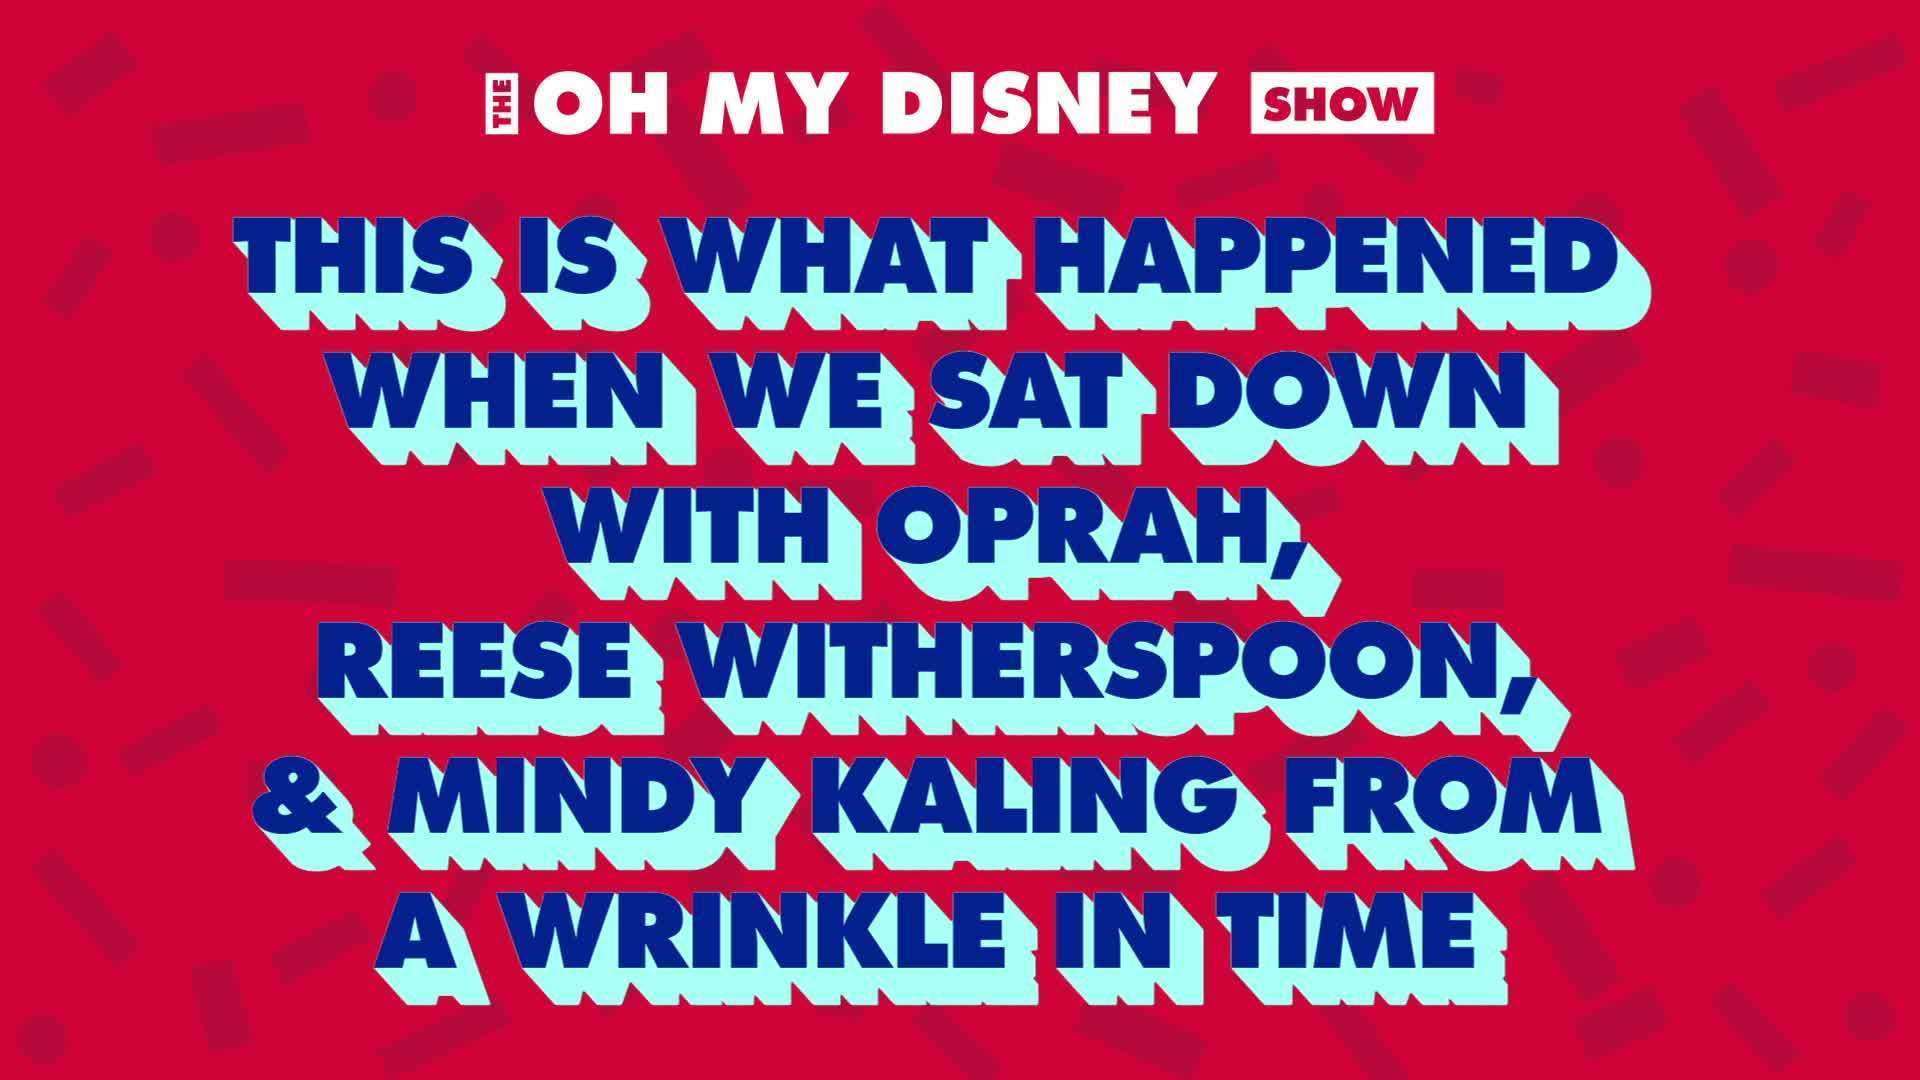 We Sat Down With Oprah, Reese, and Mindy From A Wrinkle in Time | Oh My Disney Show by Oh My Disney